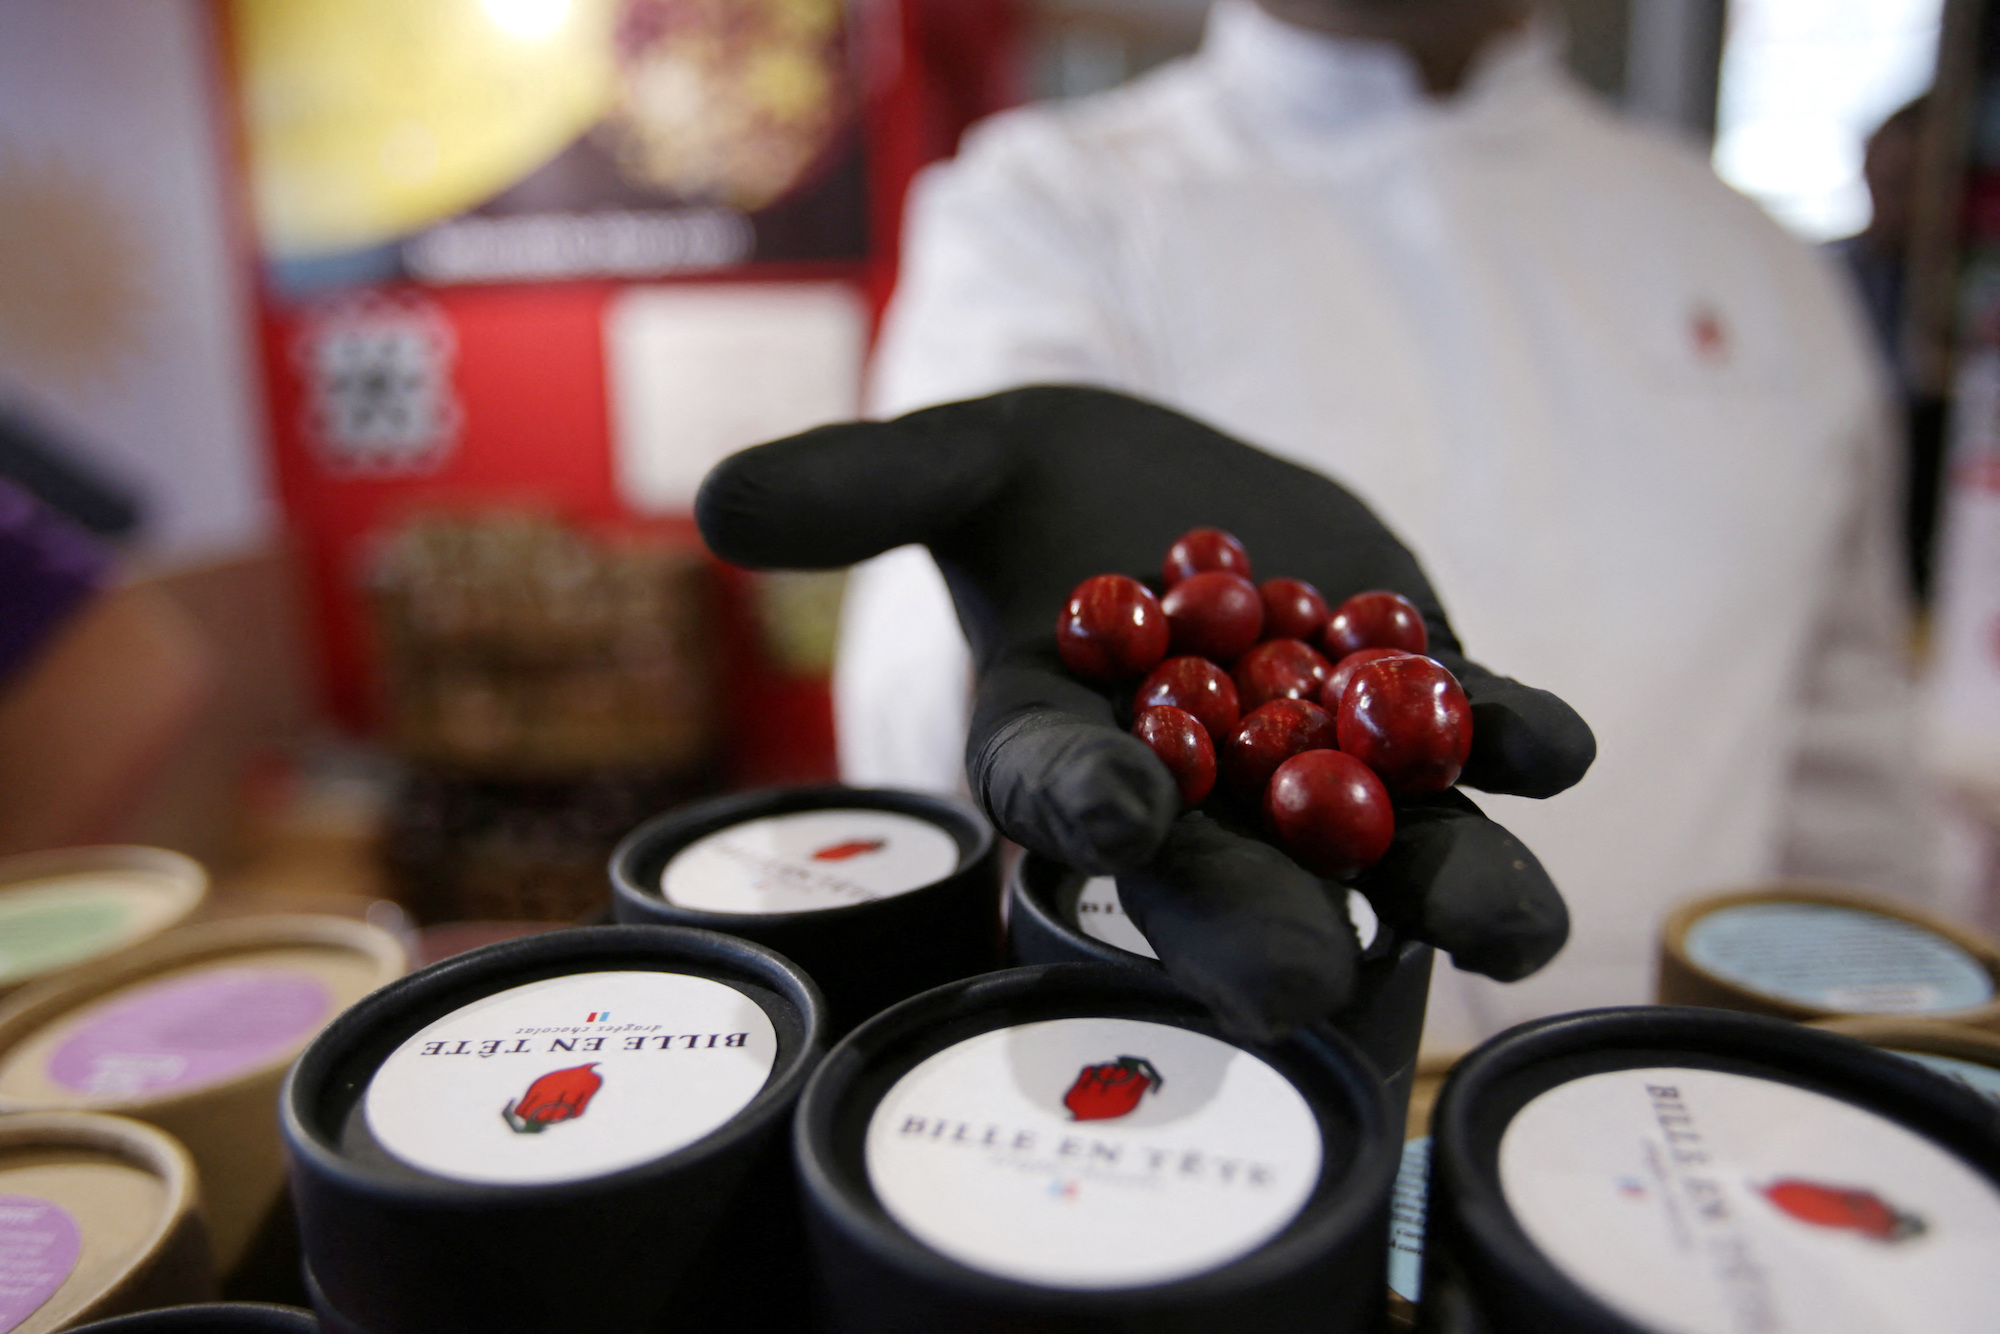 French chocolatier Damien Vidal poses with chocolates flavored with Carolina Reaper chilli pepper at the Paris Chocolate fair in Paris, France